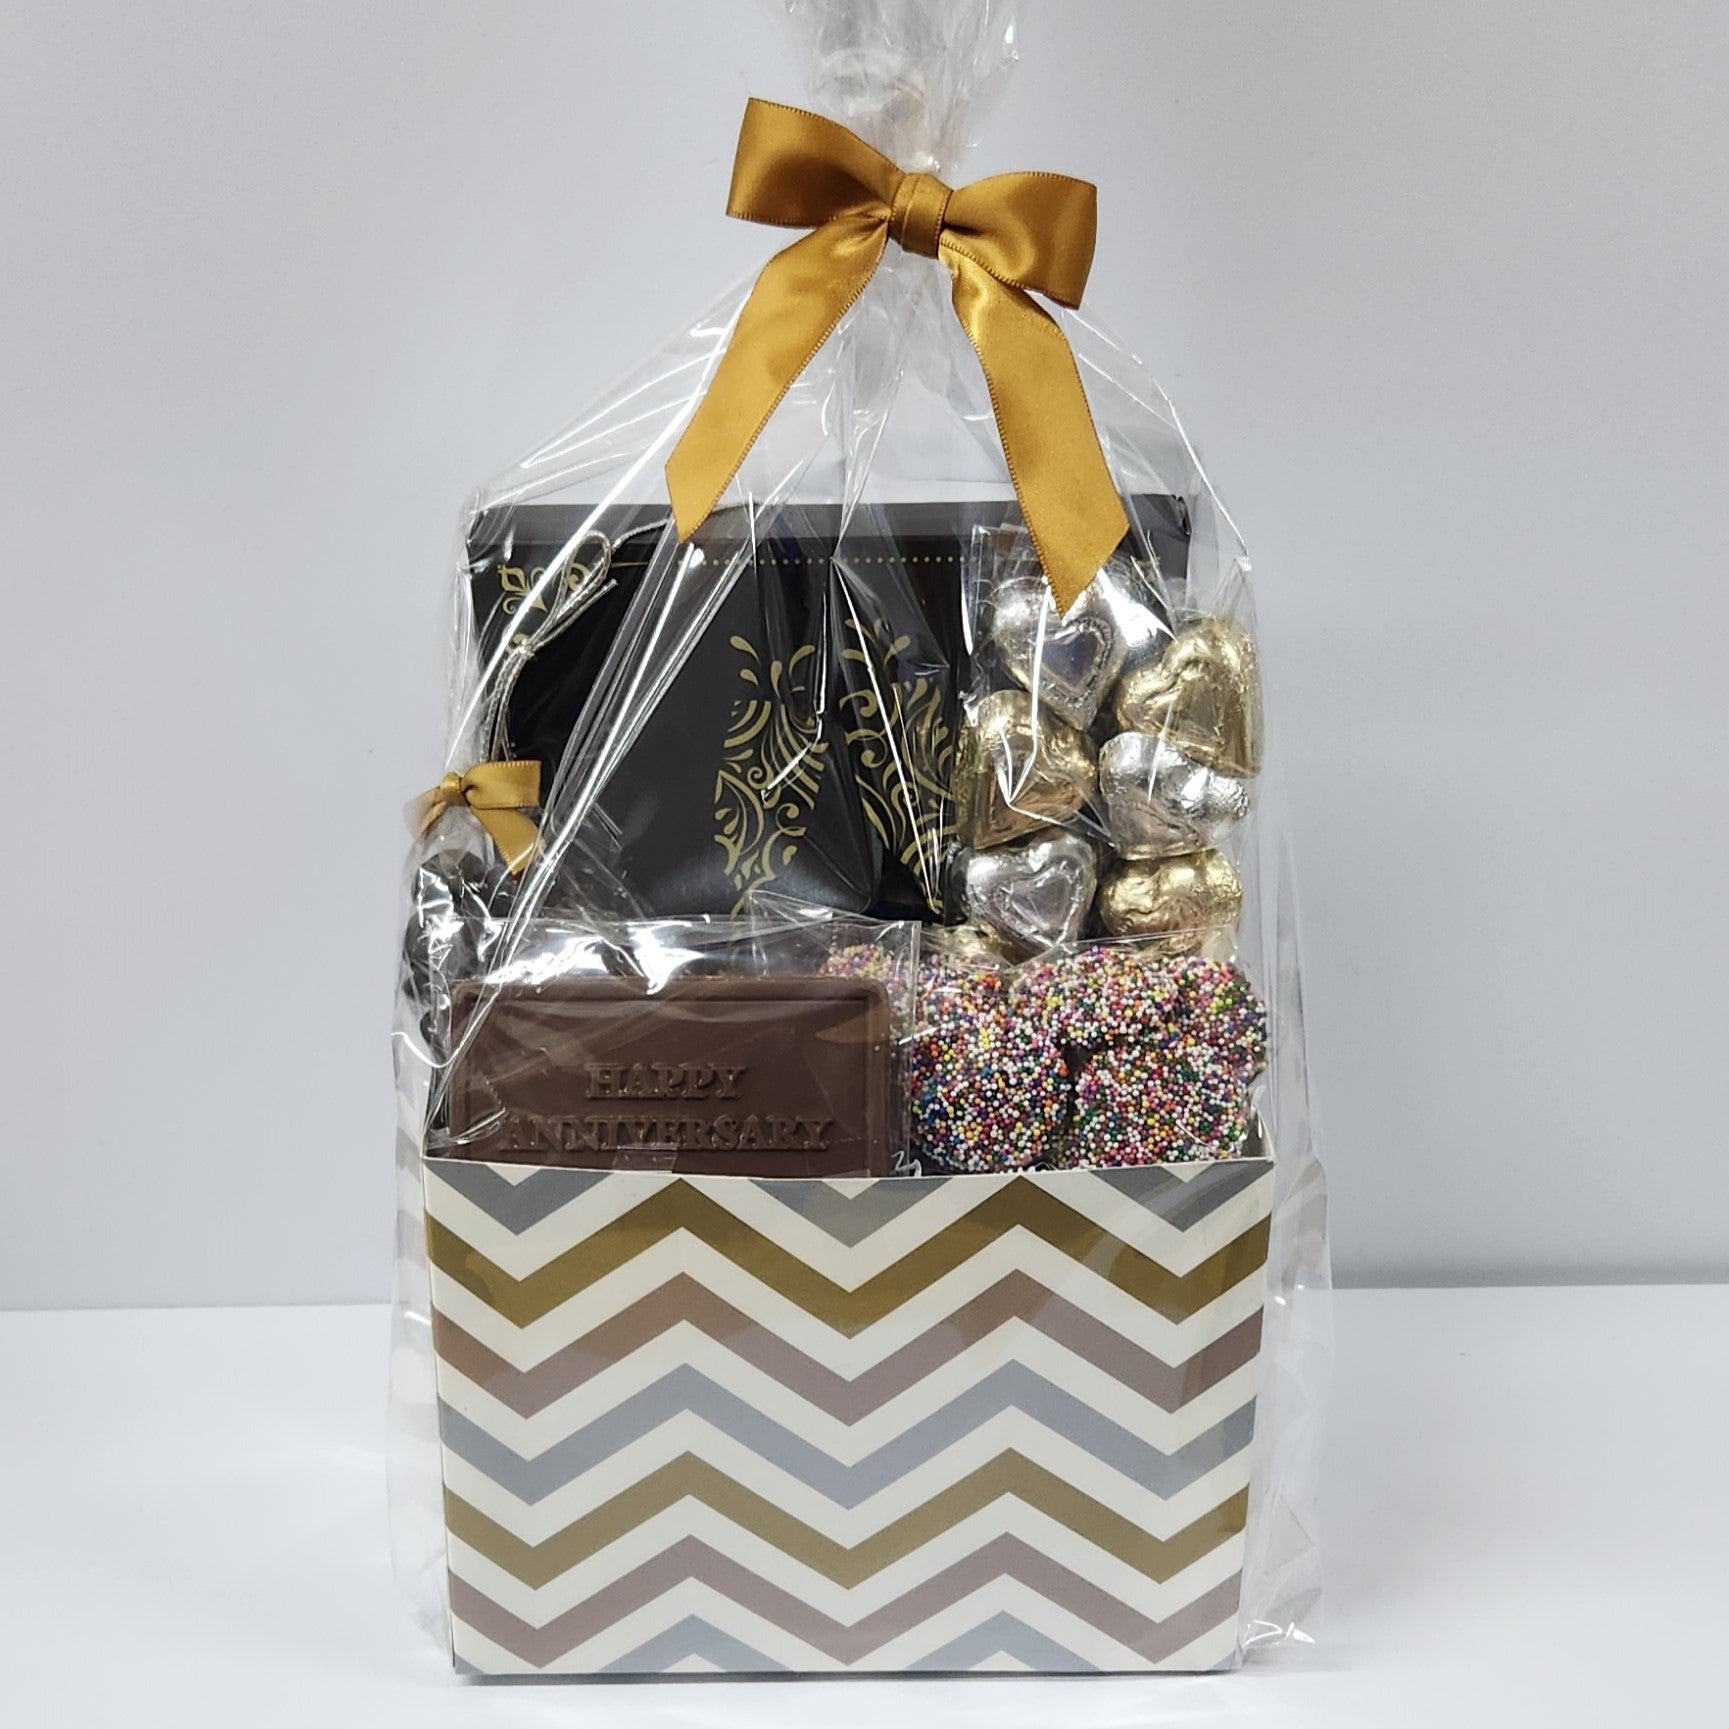 Happy Anniversary Chocolate Gift Basket from Stage Stop Candy wrapped in plastic with a gold bow